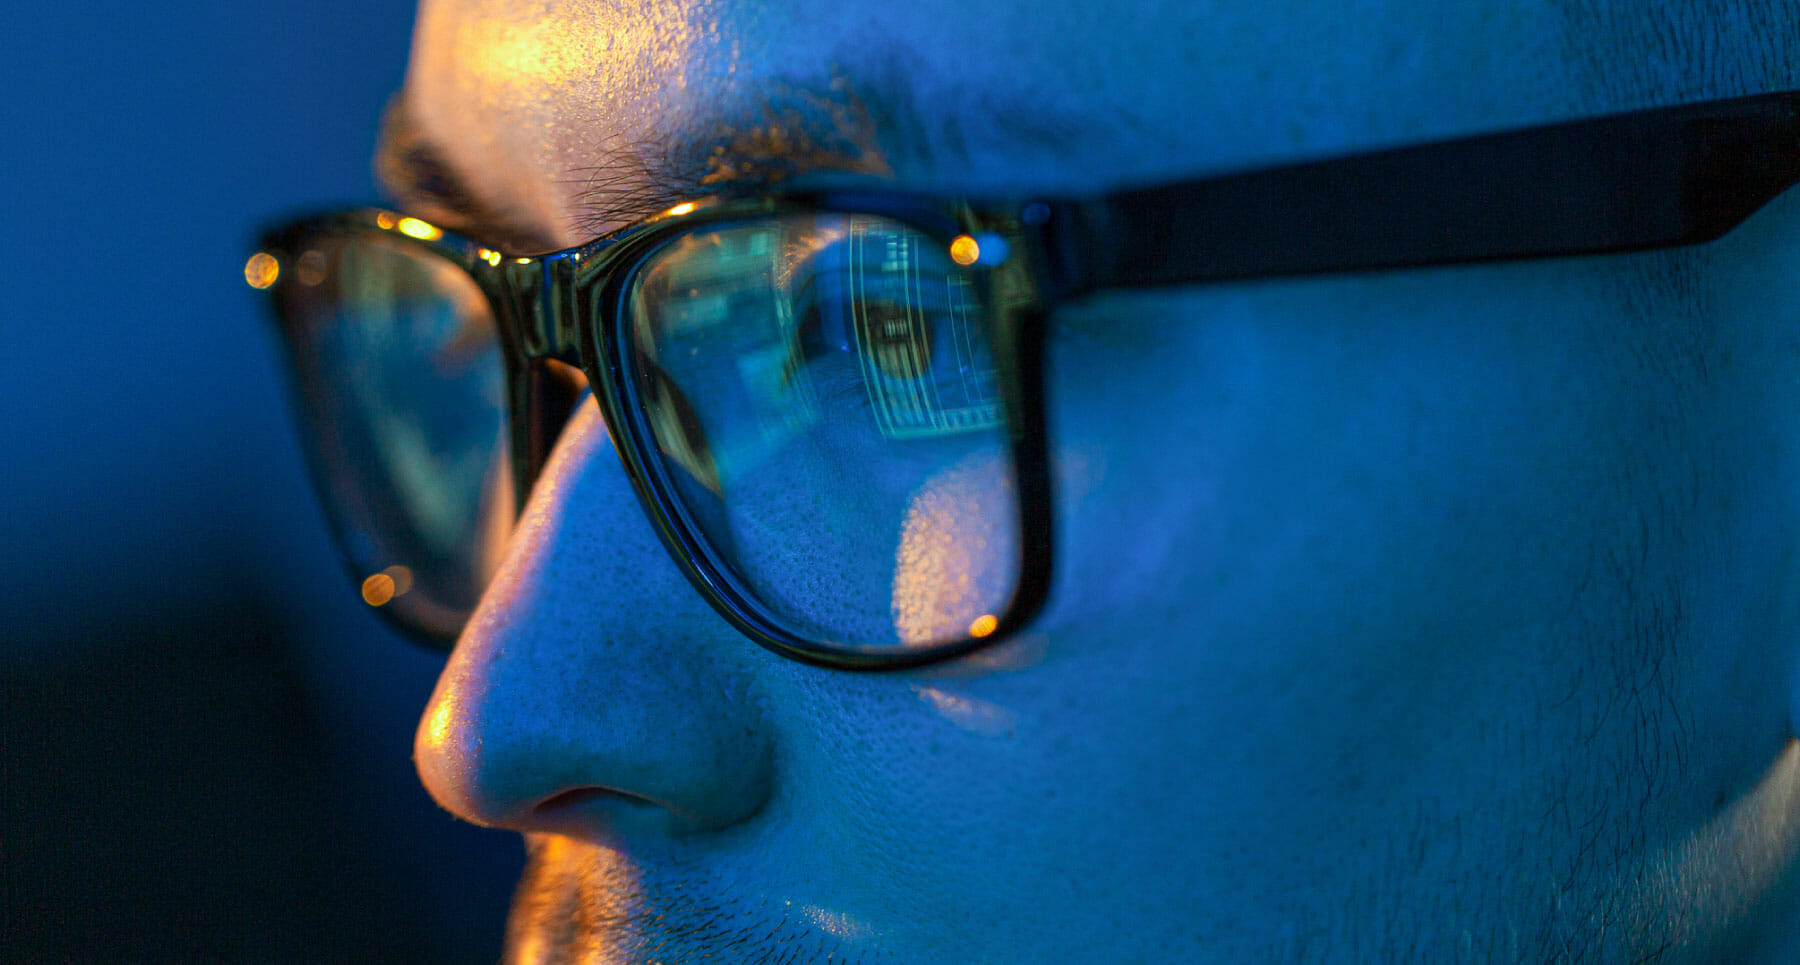 How To Know If Glasses Block Blue Light | CellularNews